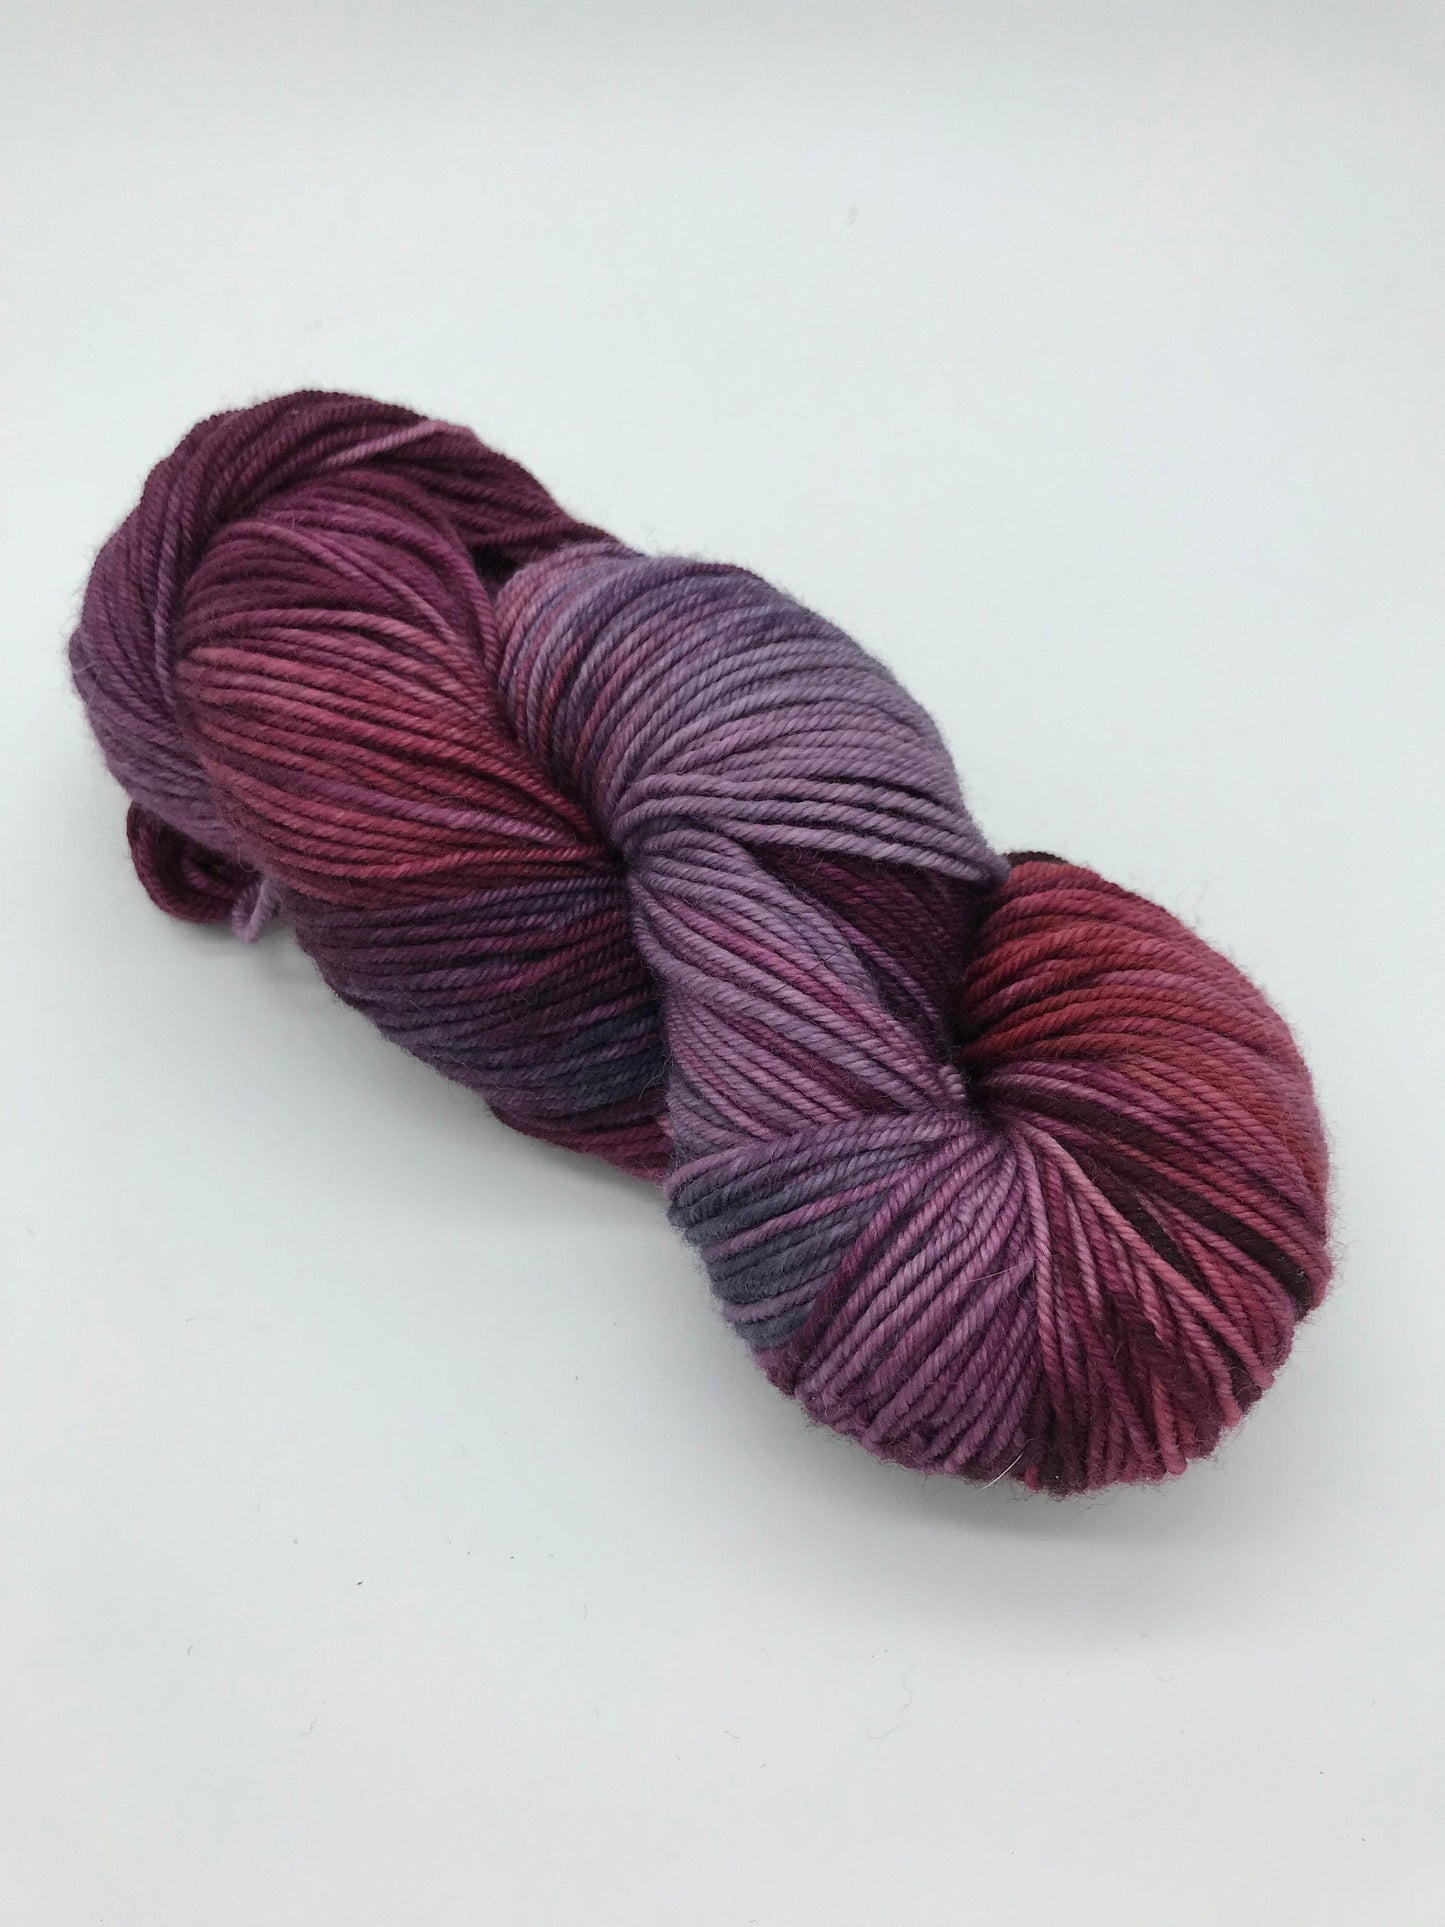 Trapeze Artist - Worsted 3 Ply - Okanagan Dye Works